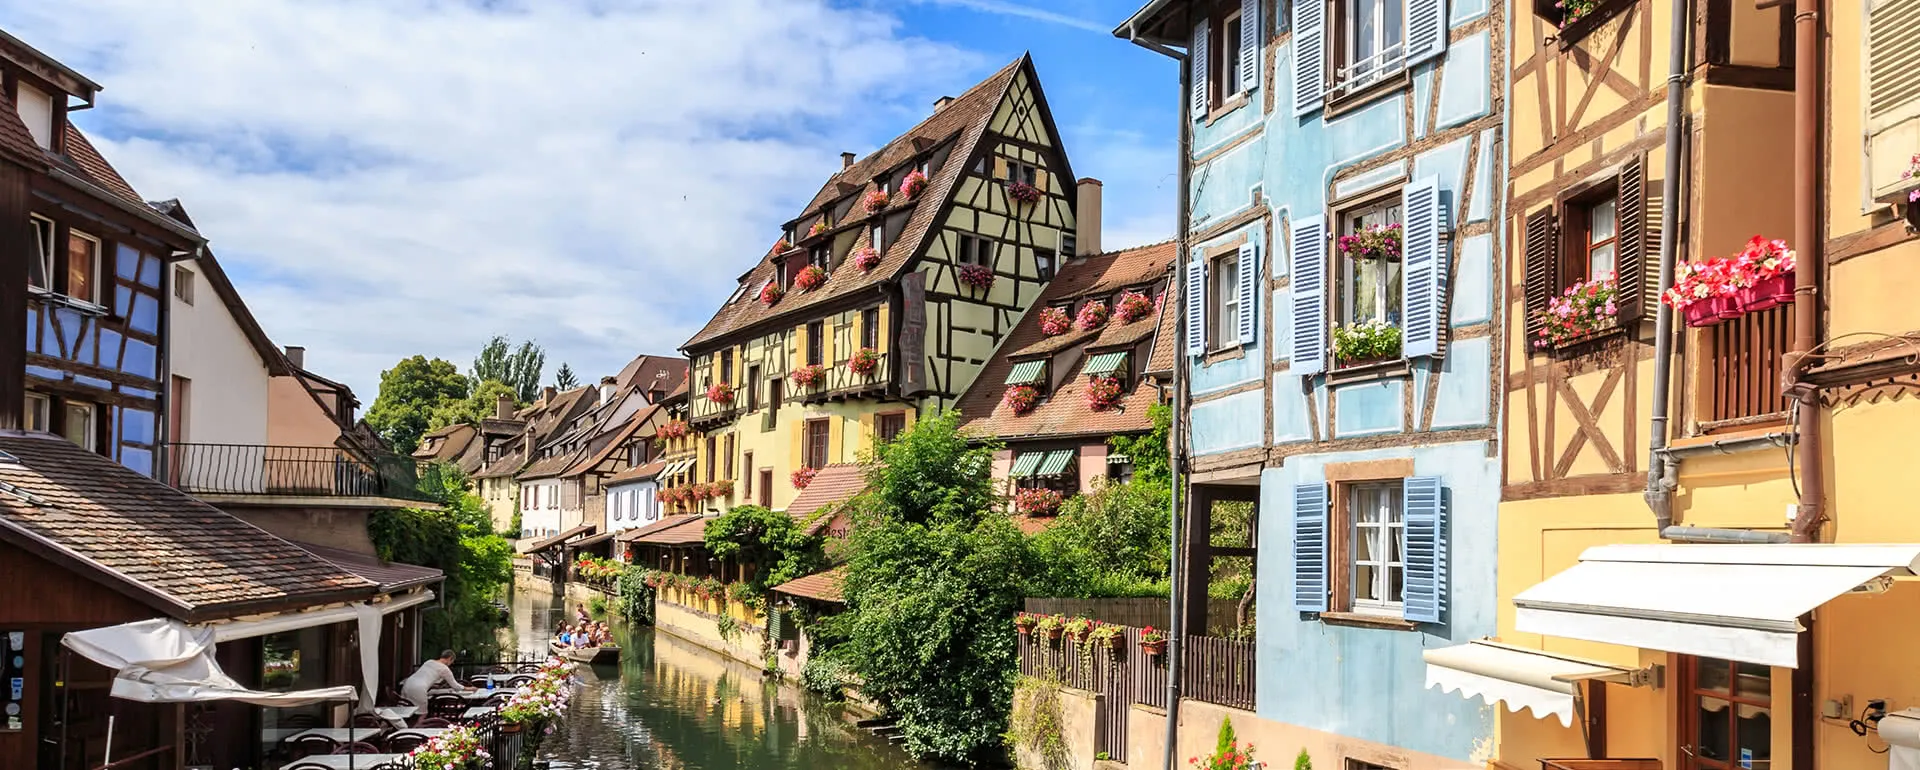 Colmar - the destination with youth hostels